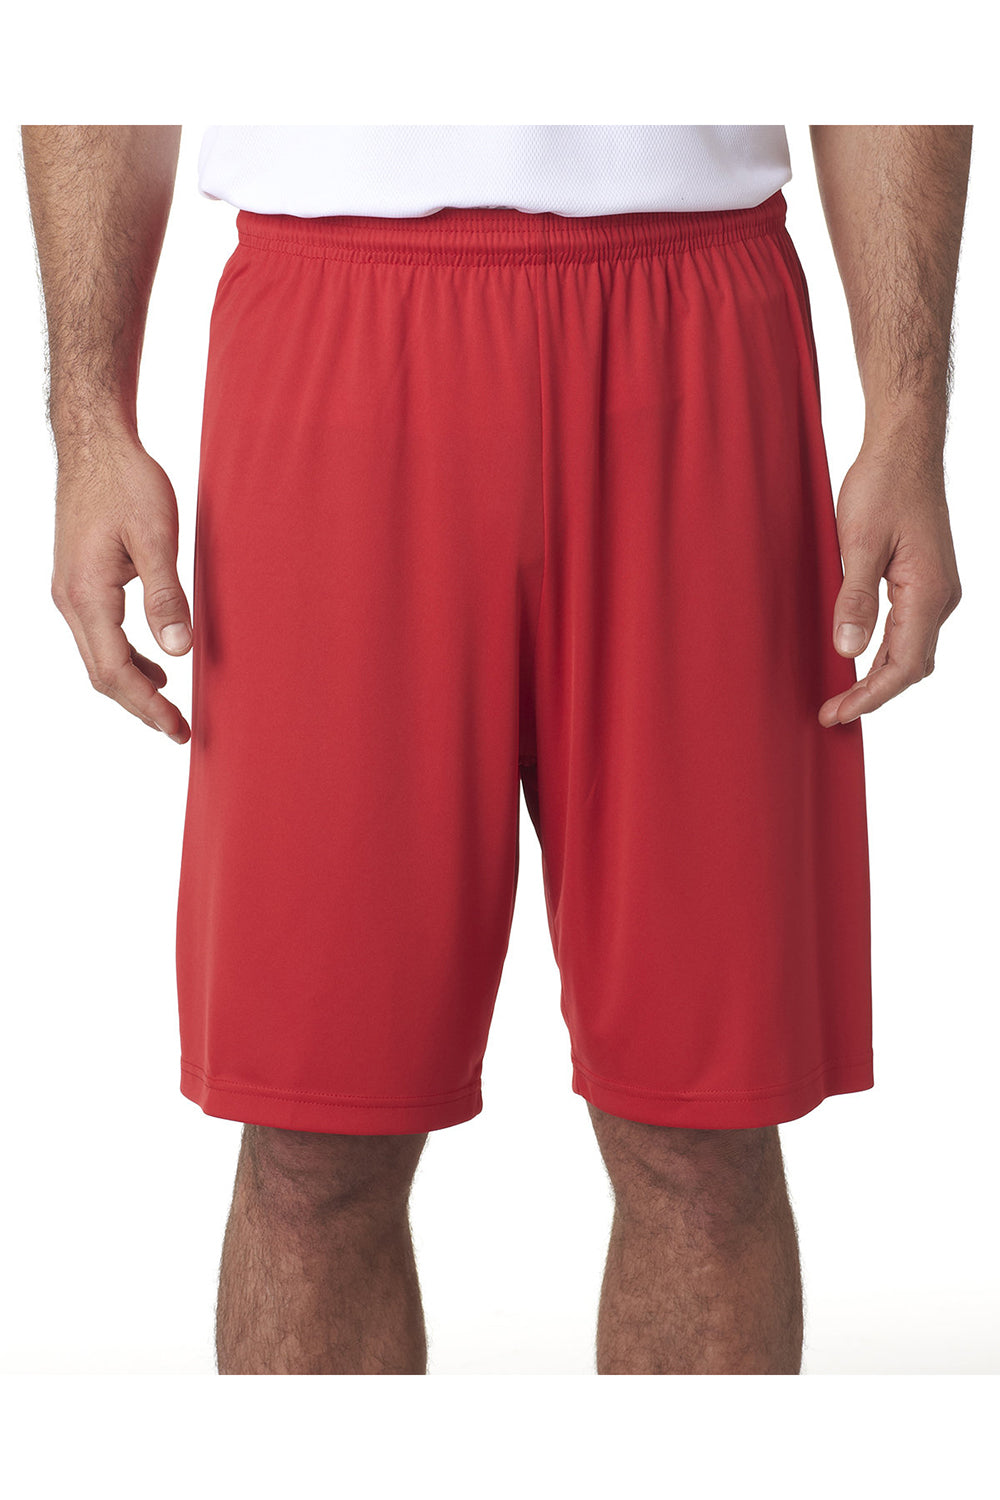 A4 N5283 Mens Moisture Wicking Performance Shorts Scarlet Red Model Front